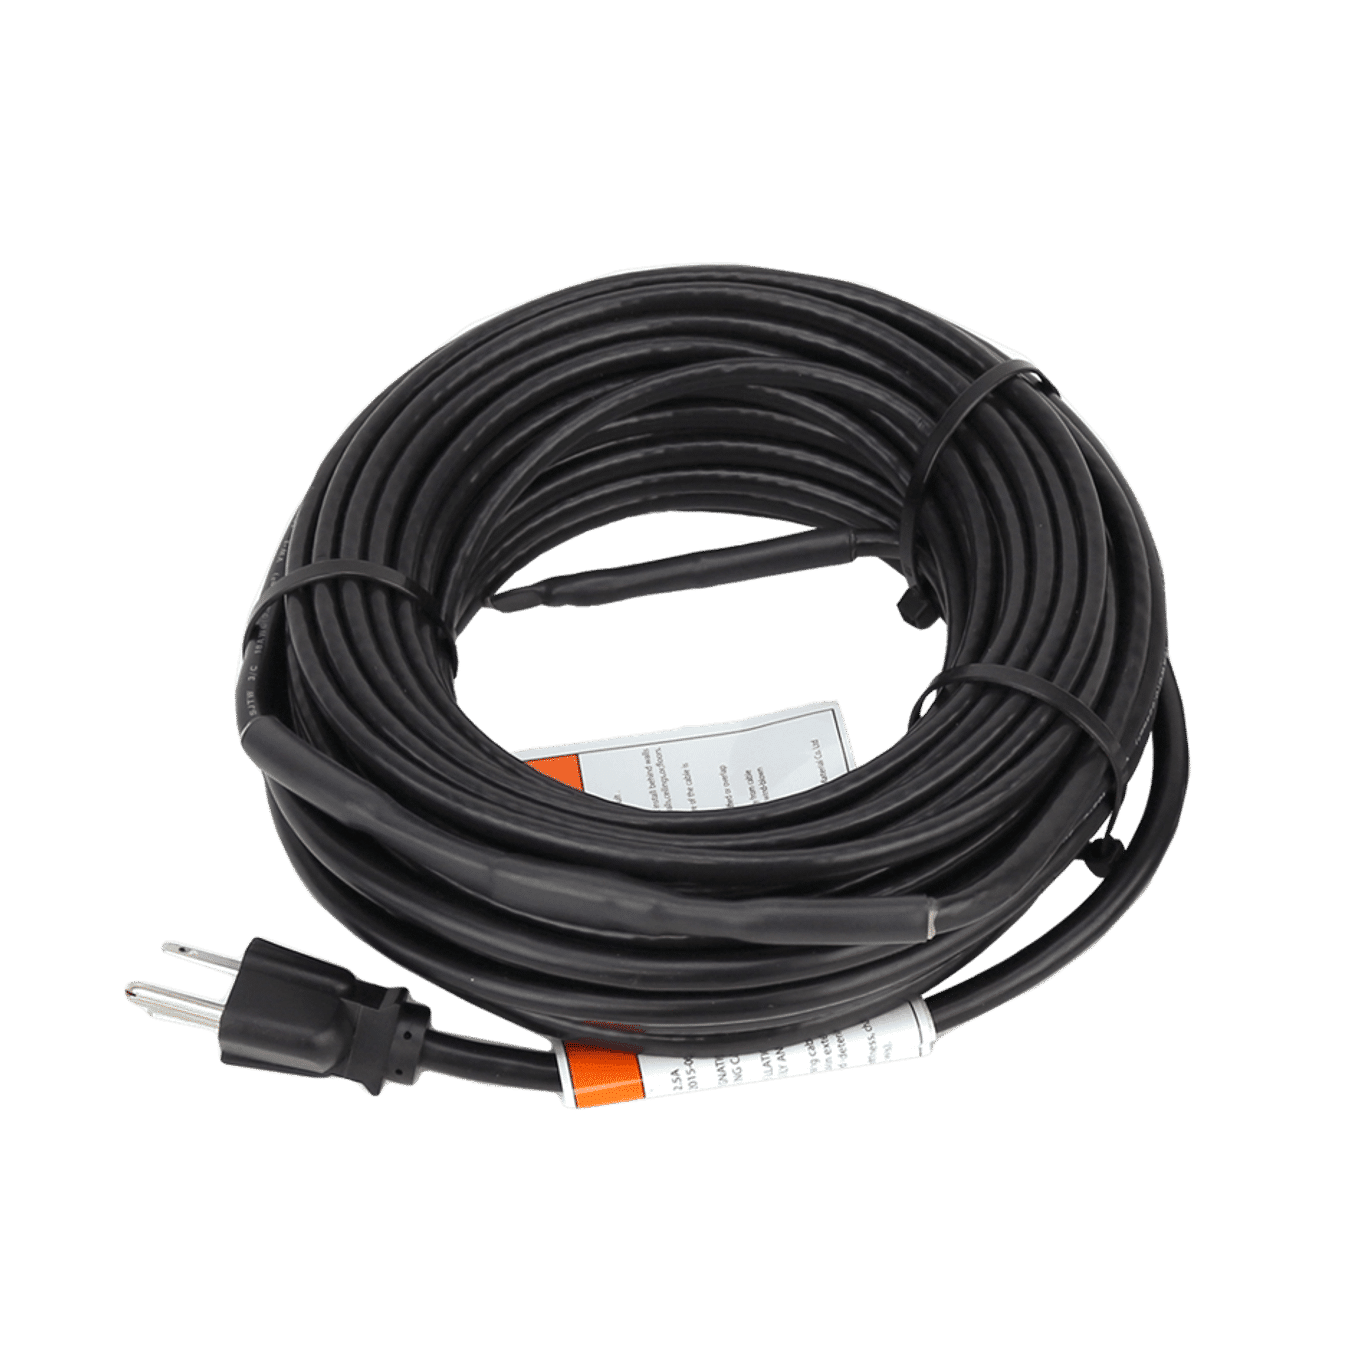 Roof & Gutter Deicing Plug-in Cable